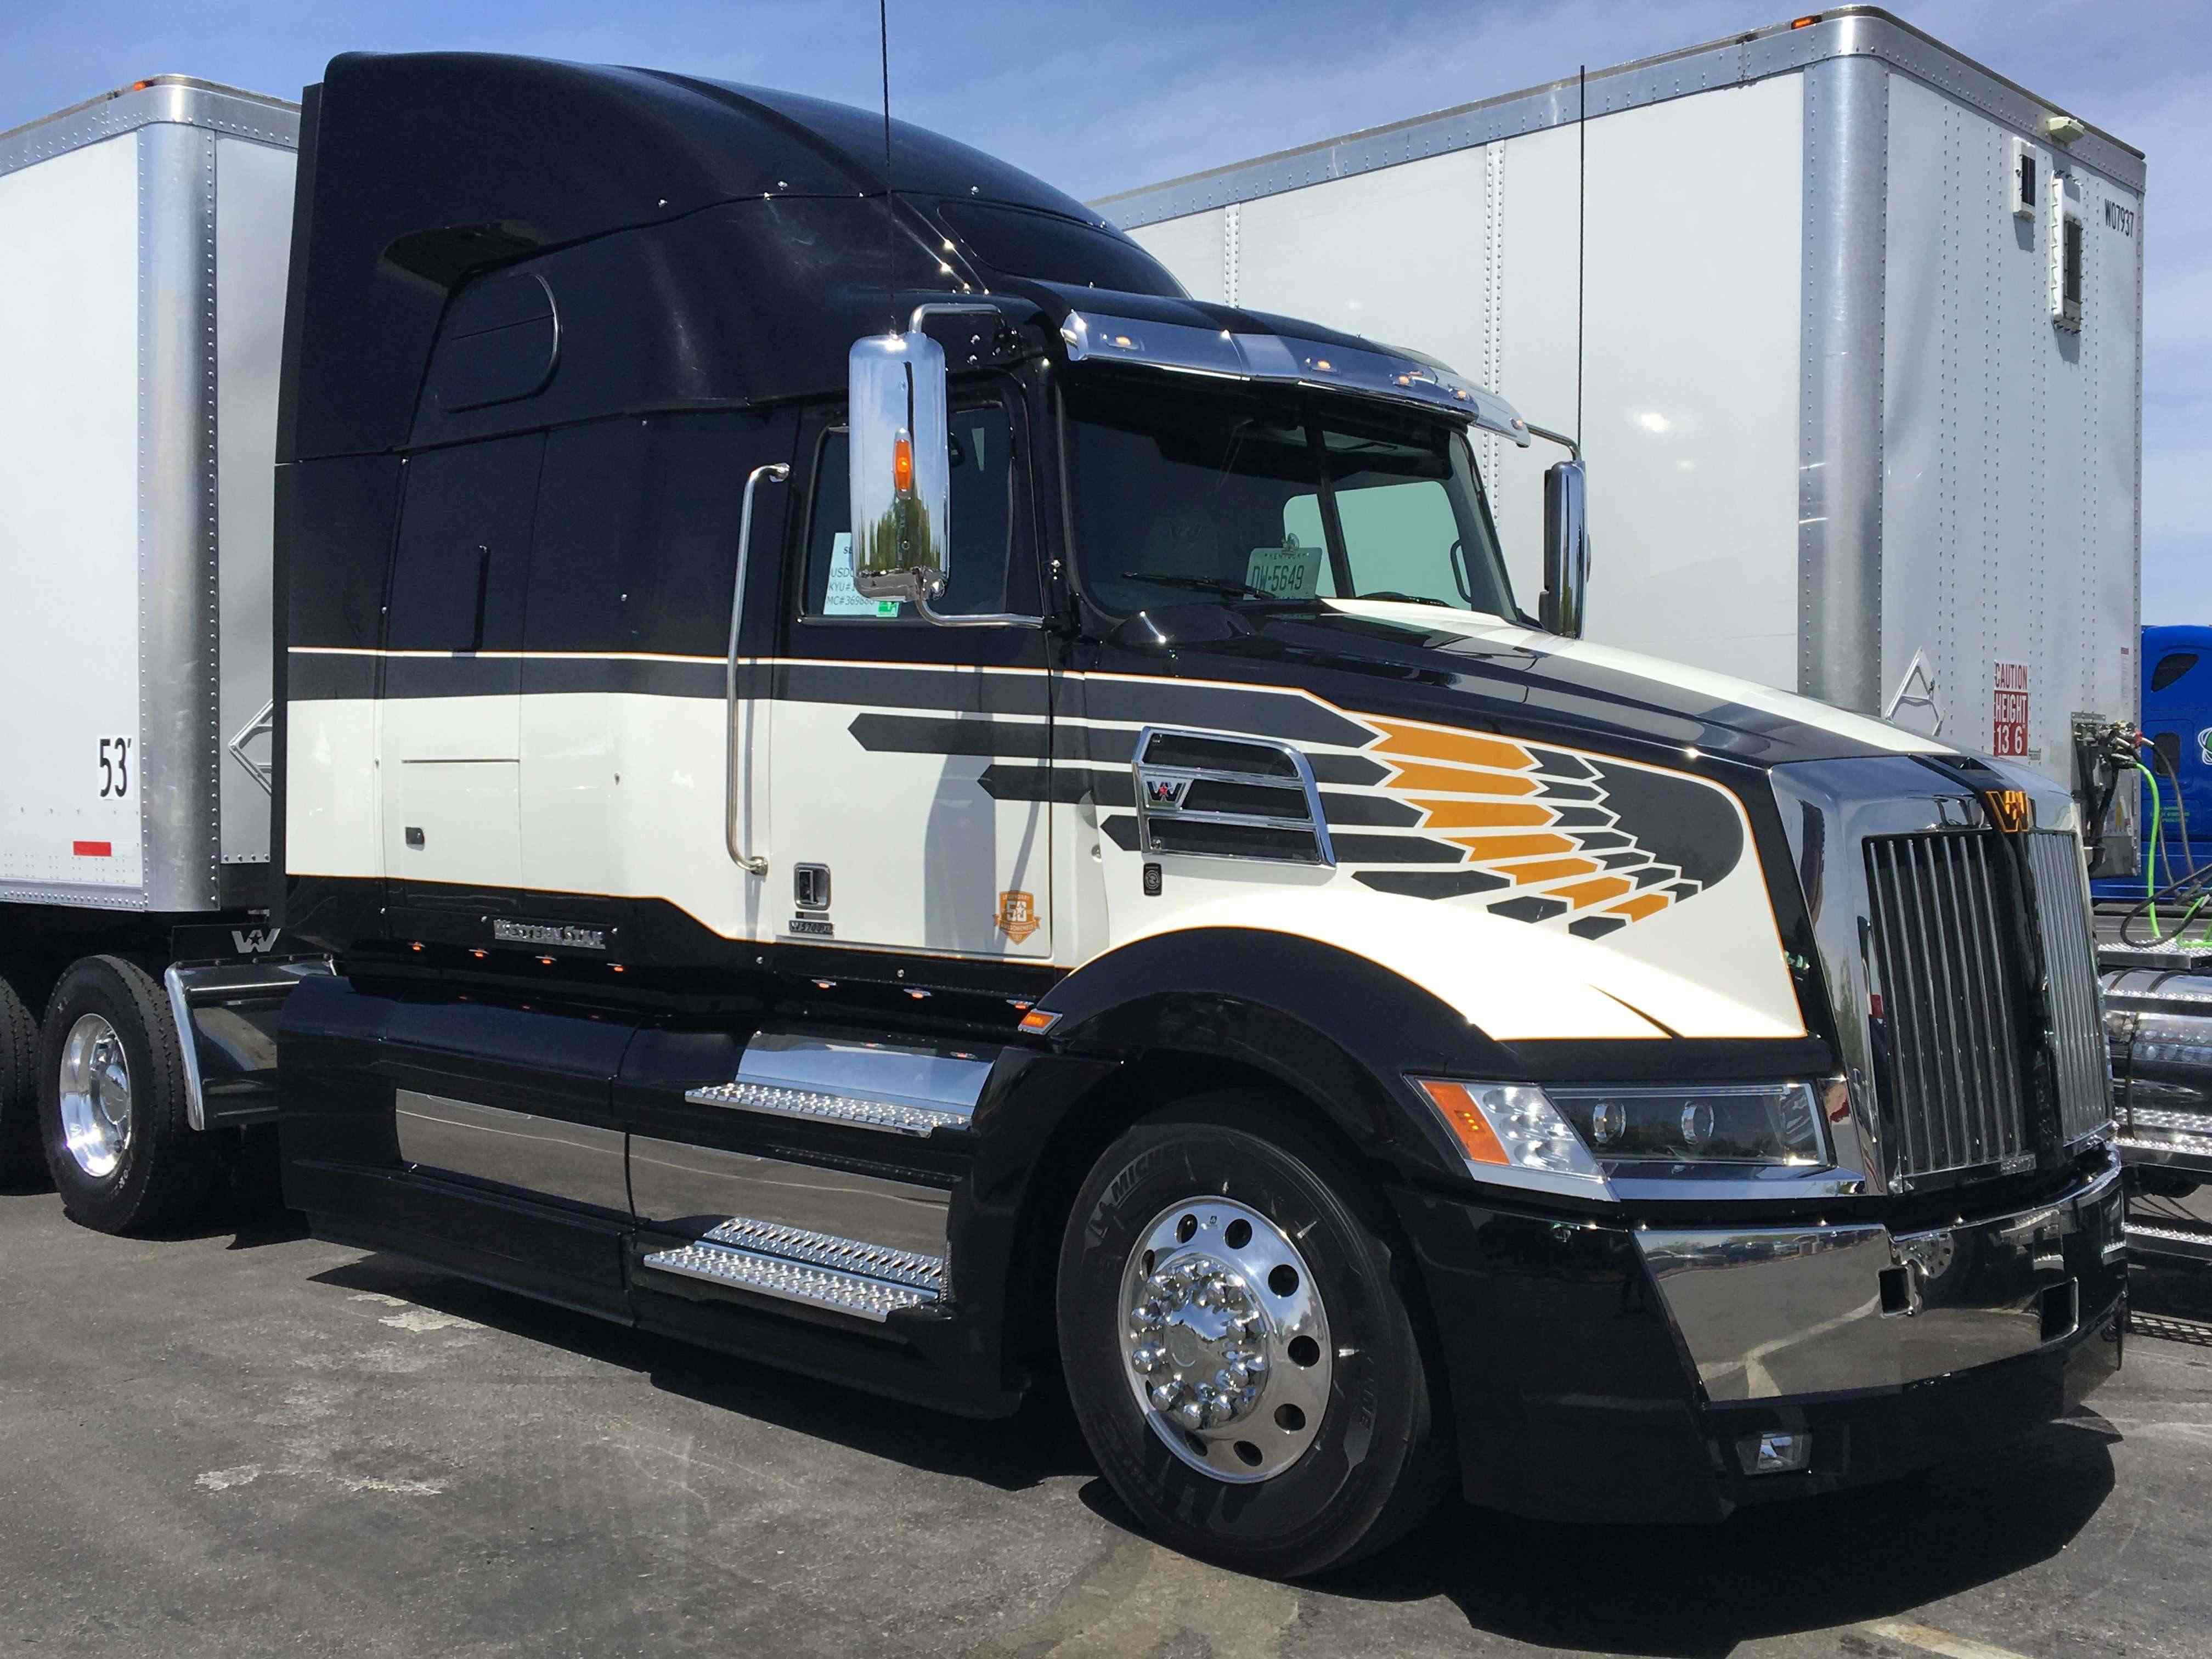 Western Star 5700XE with 'Wings of Awesomeness' graphics package